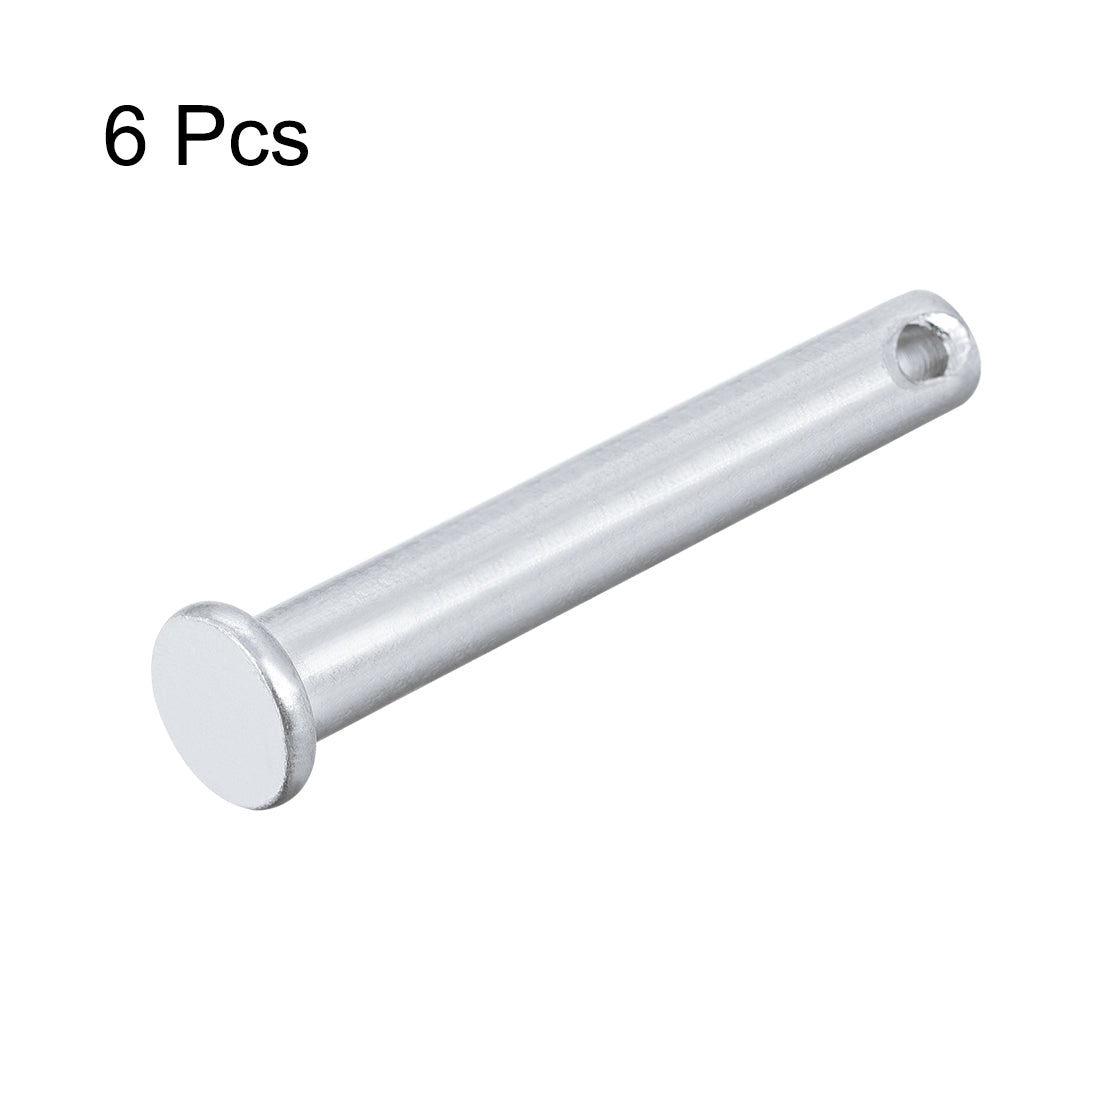 Uxcell Uxcell Single Hole Clevis Pins - 10mm x 45mm Flat Head Zinc-Plating Solid Steel Link Hinge Pin 6Pcs